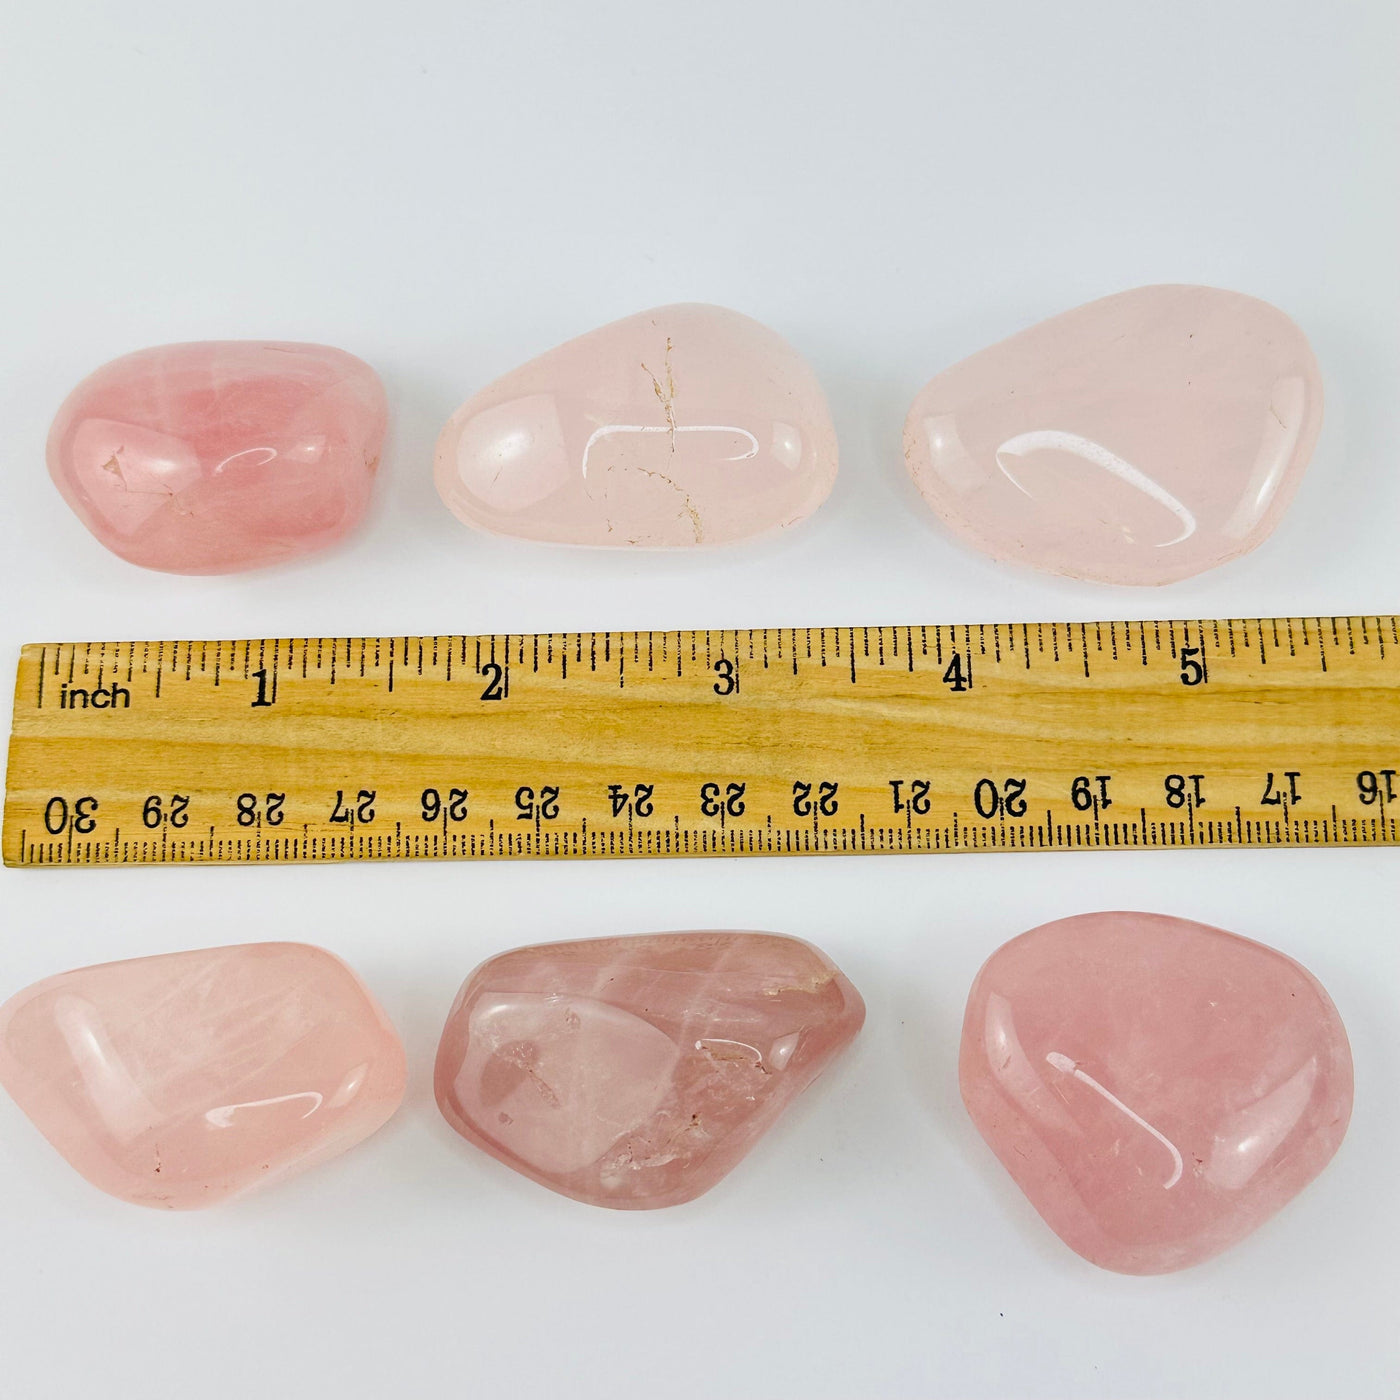 Rose Quartz Extra Quality Tumbled Stones next to a ruler for size reference 